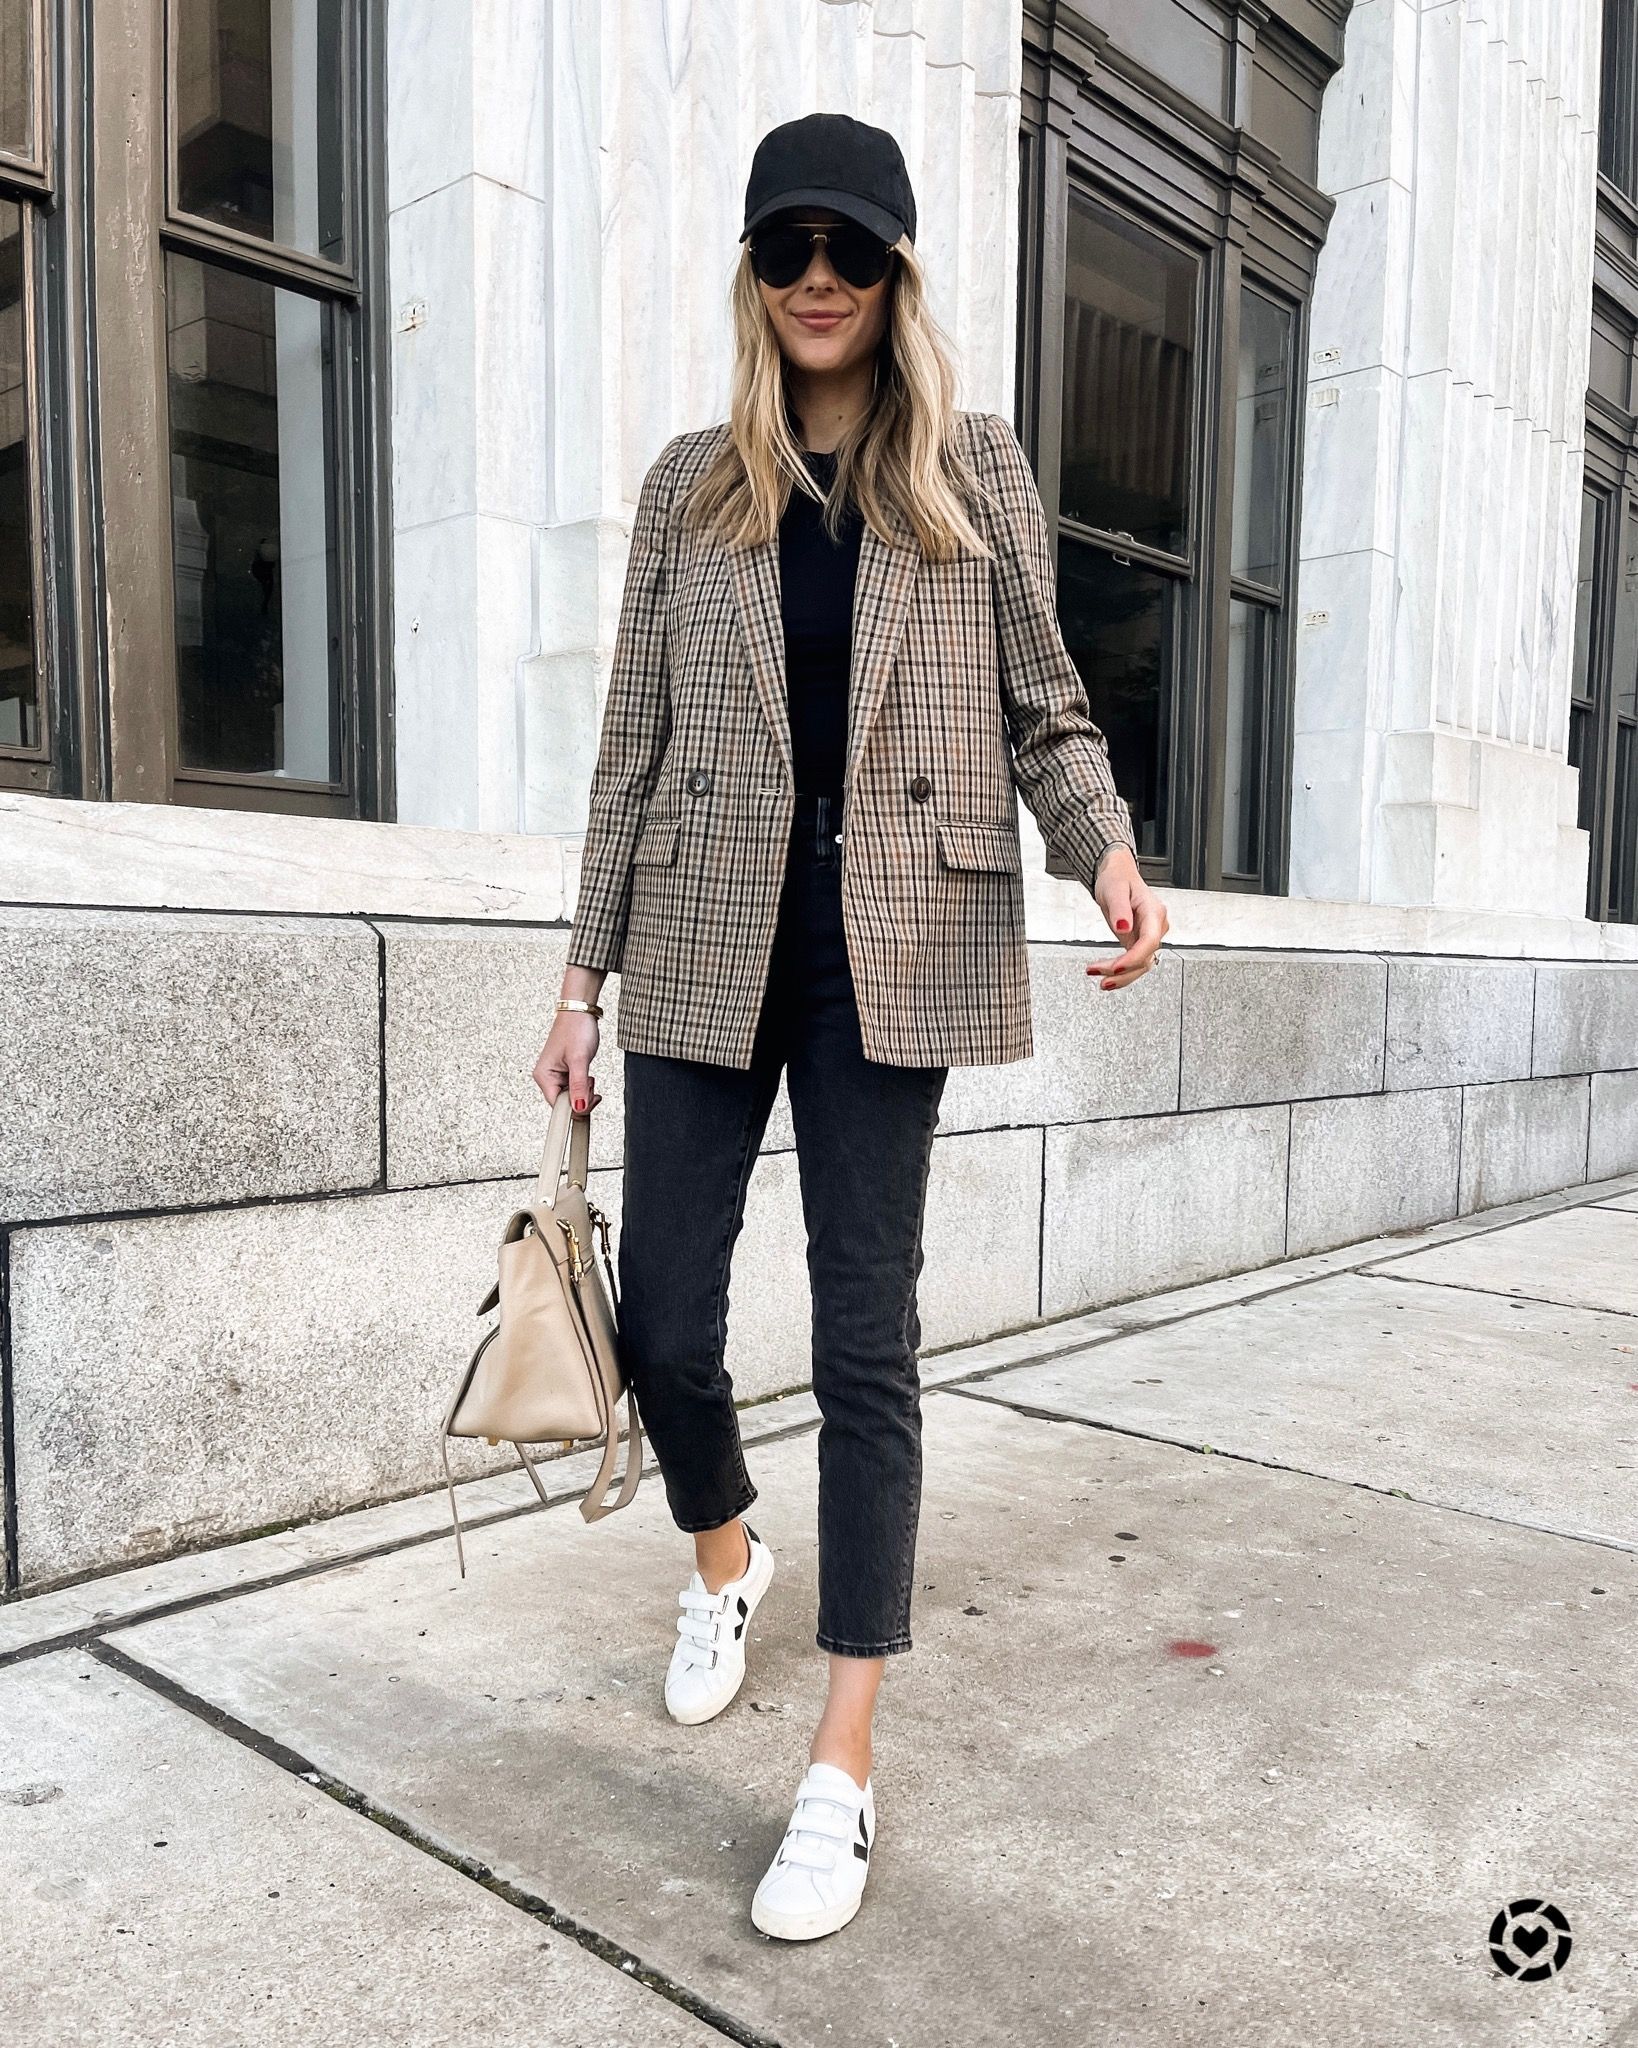 Blazer with Jeans: How to Nail This Casual-Chic Look